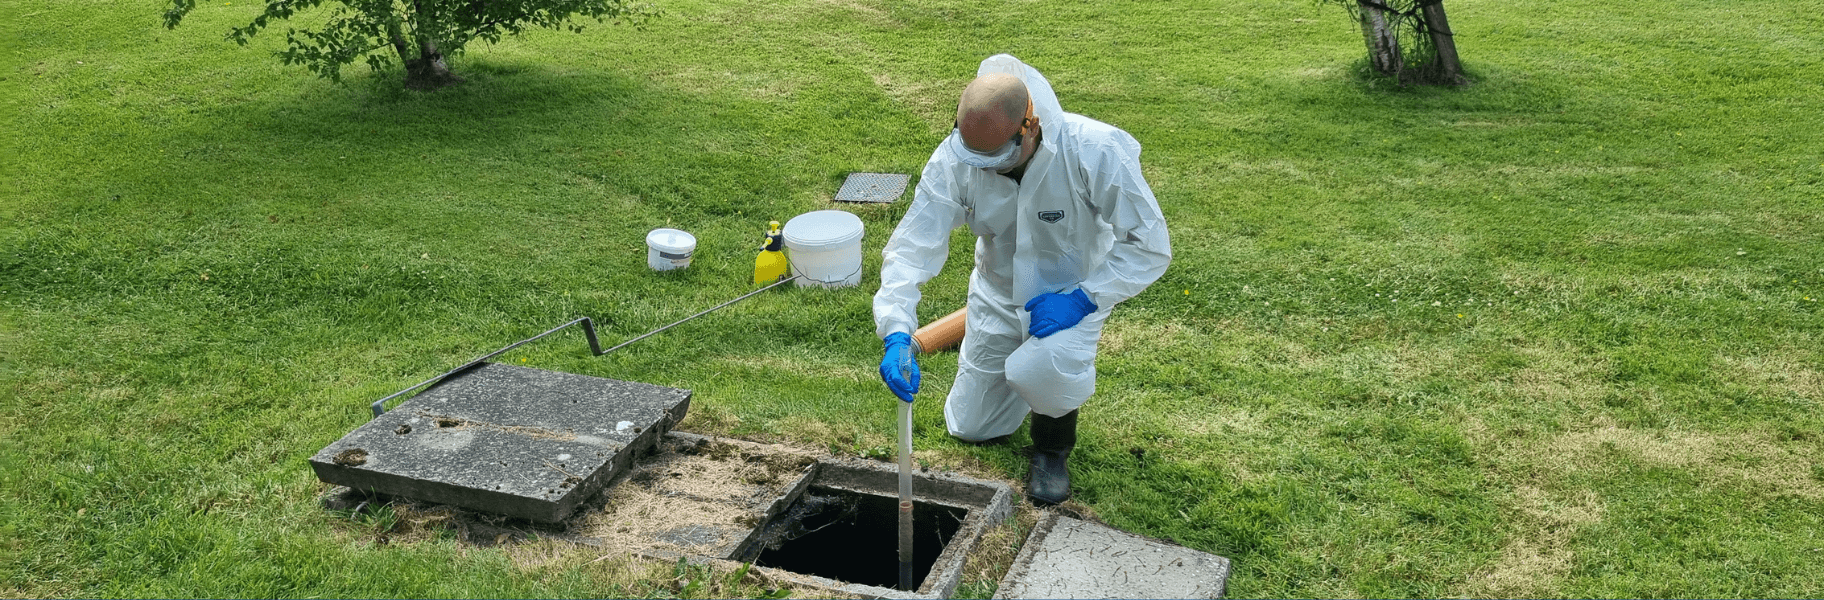 Inspection of a septic tank (Domestic waste water treatment system)